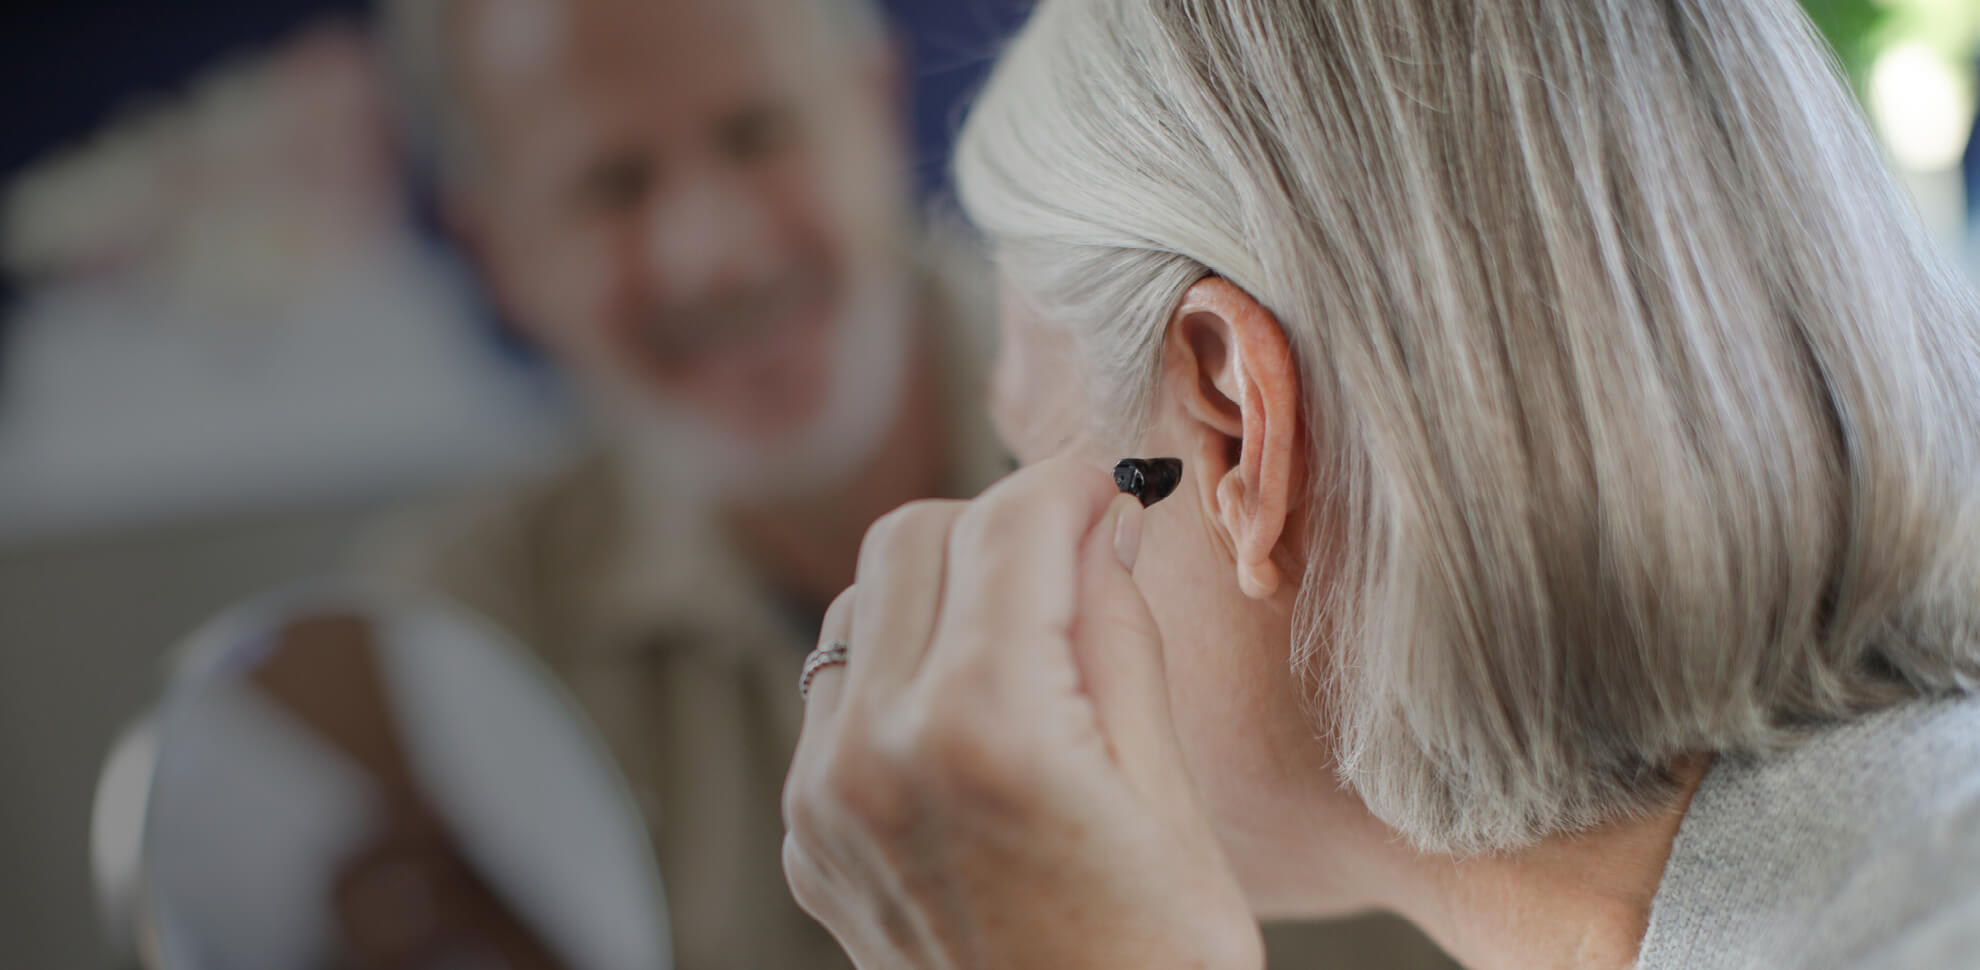 Woman putting a hearing aid in her ear.